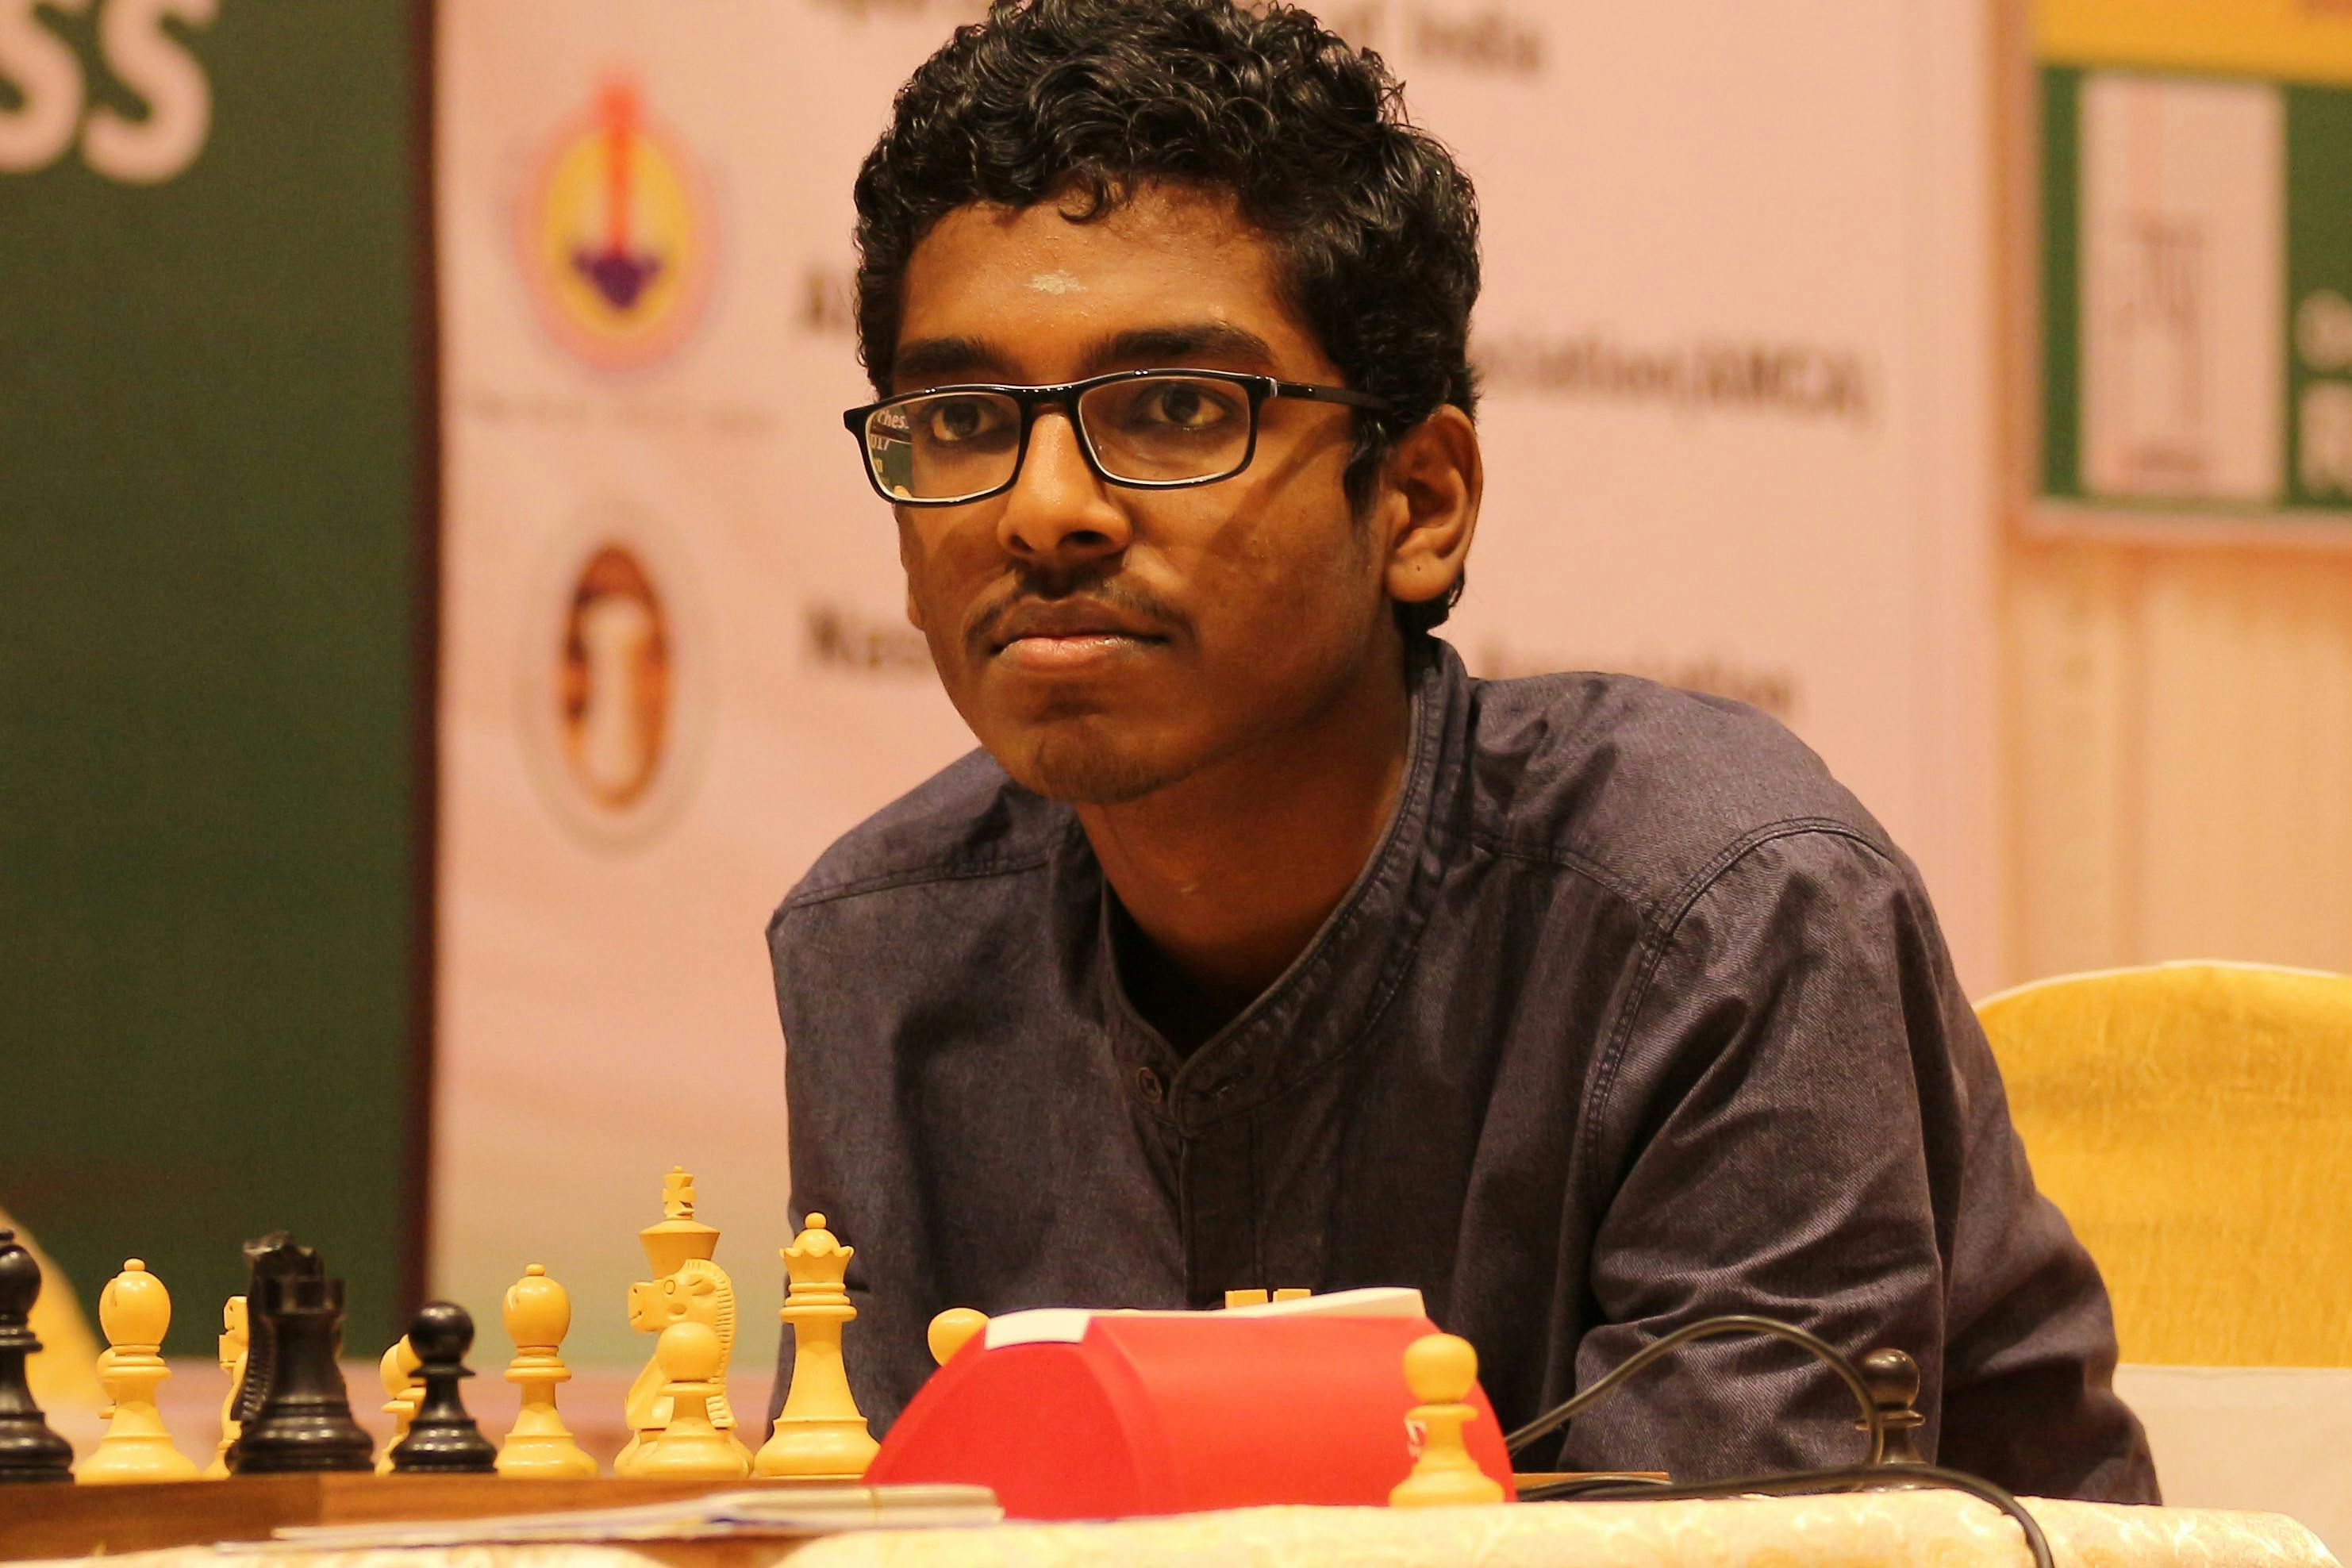 Our chess player advanced in the FIDE ranking